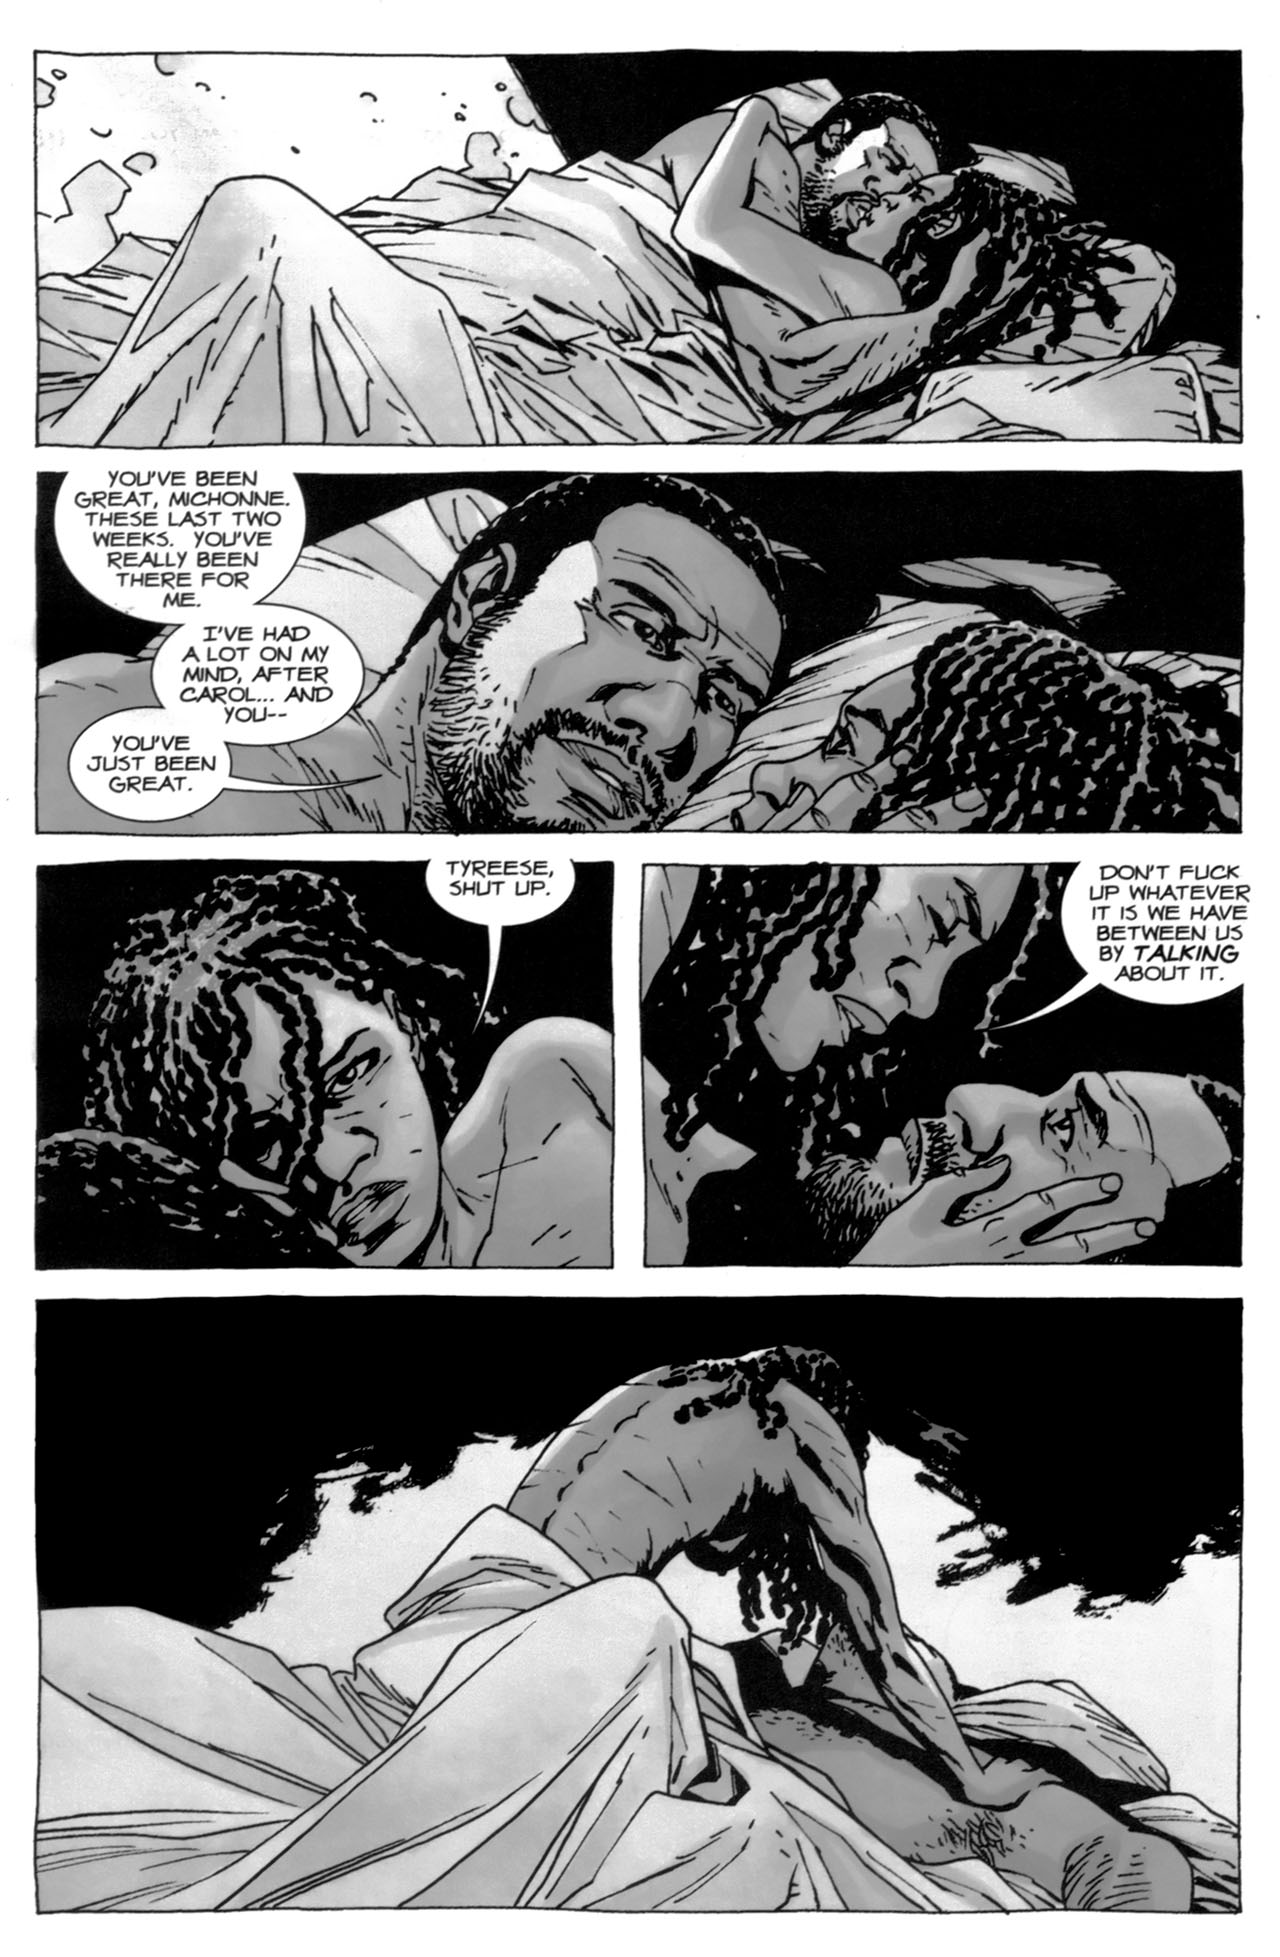 cartoon - You'Ve Been Great, Michonne, These Last Two Weeks. You'Ve Really Been There For Me. I'Ve Had A Lot On My Mnd, After Carol... And You You'Ve Just Been Great. Tyreese, Shut Up Don'T Fuck Up Whatever It Is We Have Between Us By Talking About It.